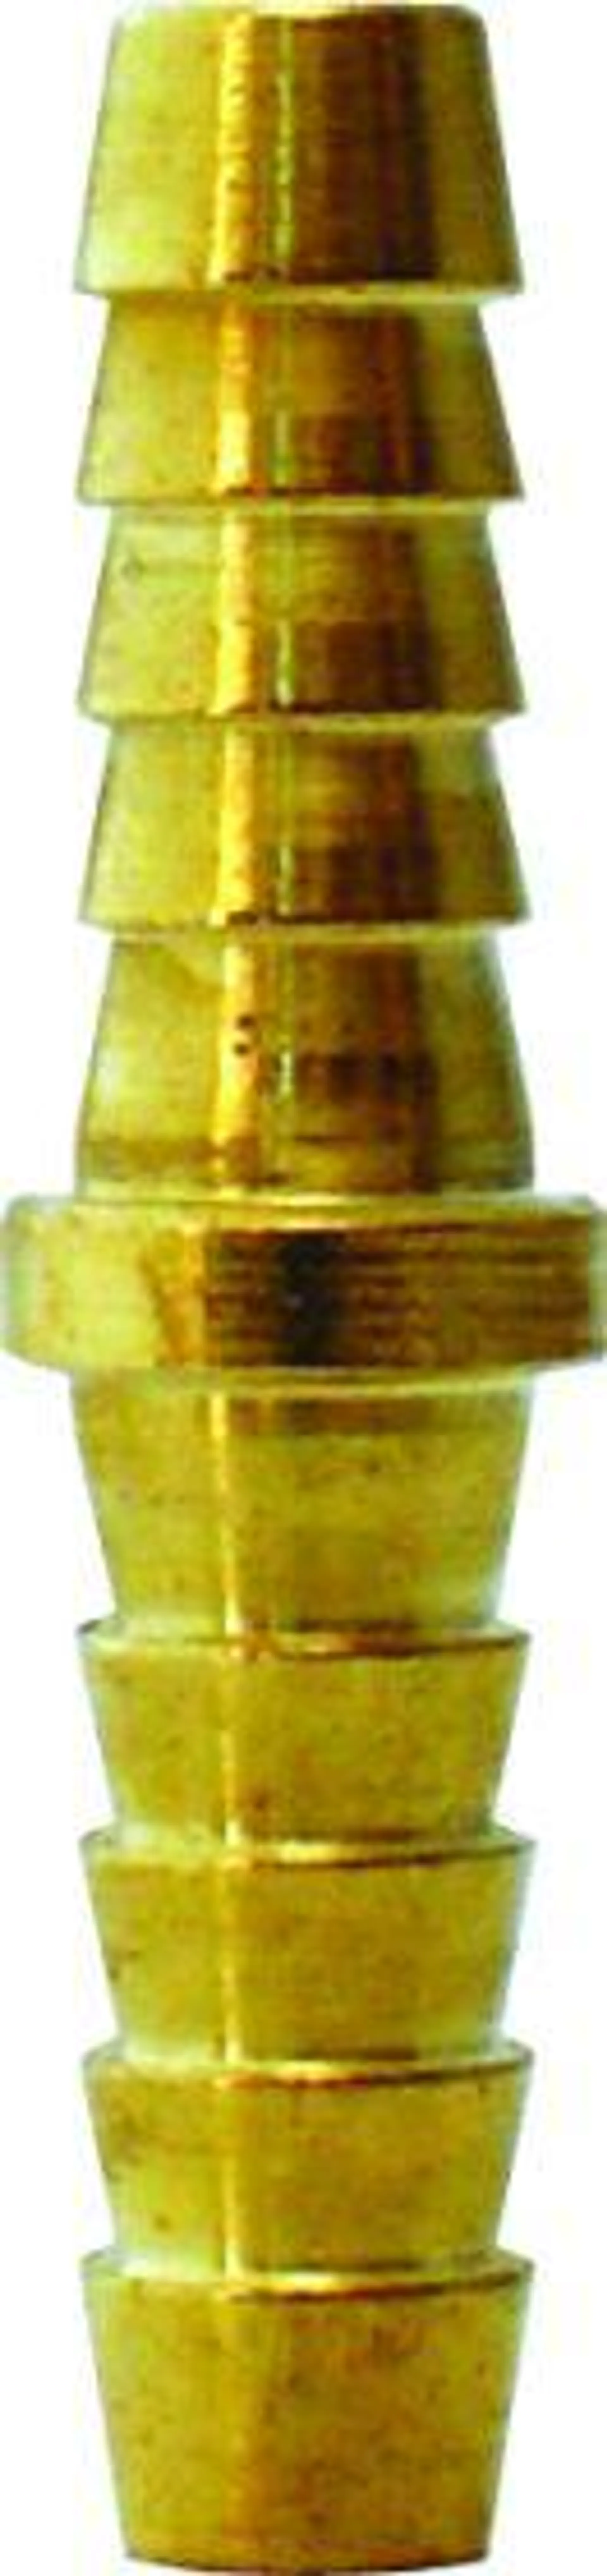 Aircraft Airline Connector 8mm SG10233